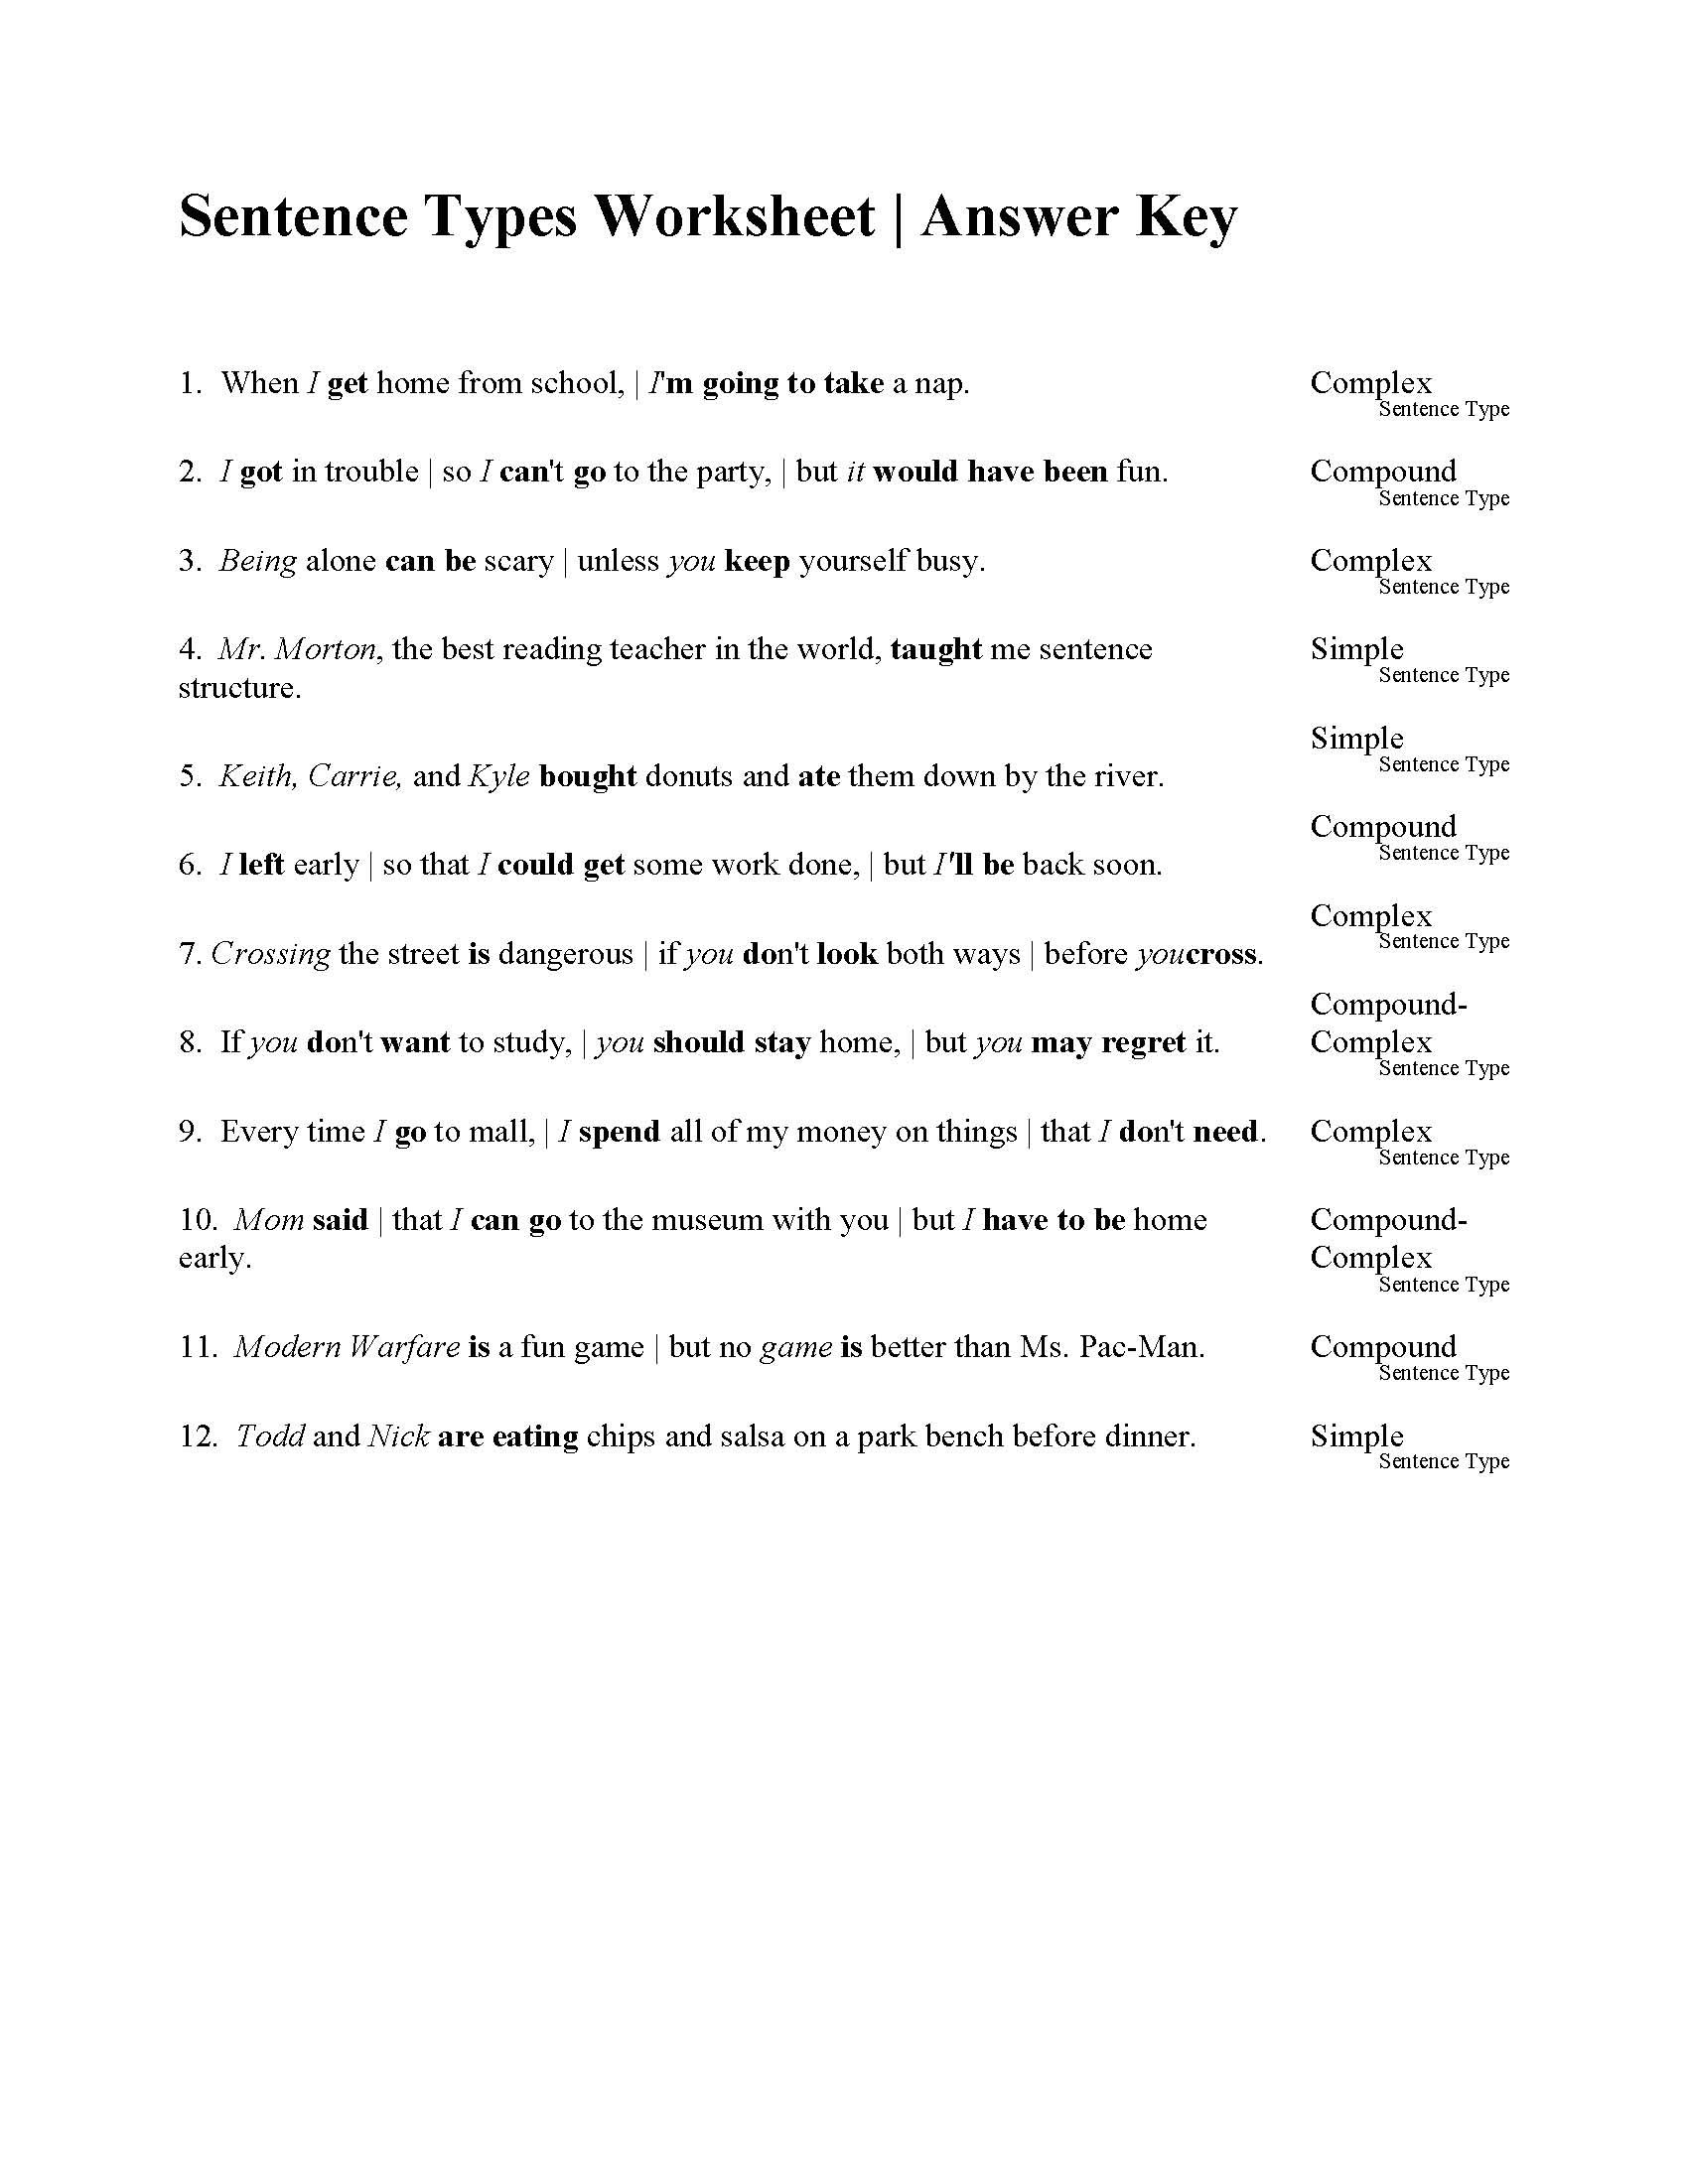 Sentences Types Worksheet  Answers For Teacher Answer Keys And The Worksheets